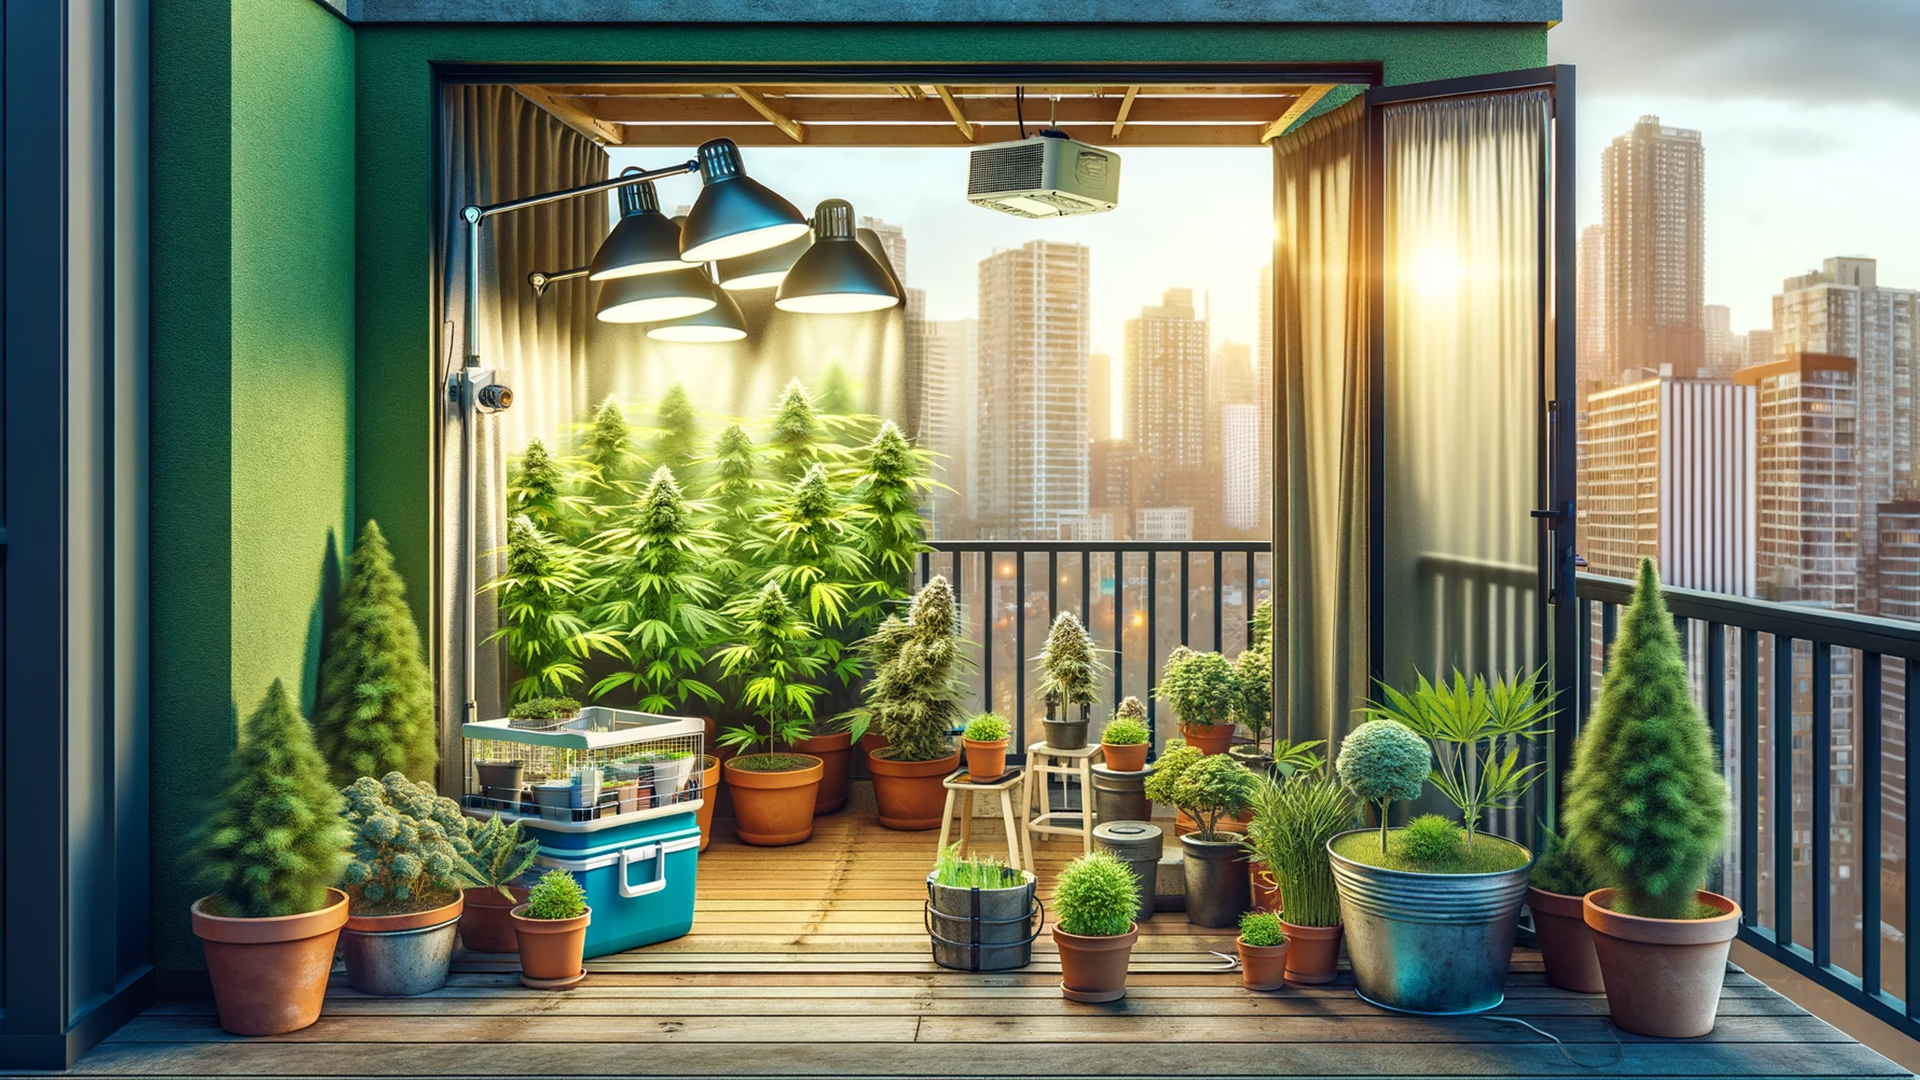 Urban apartment balcony with lush cannabis garden, featuring pots of healthy cannabis plants, grow lights, and a small grow tent against a city skyline backdrop.